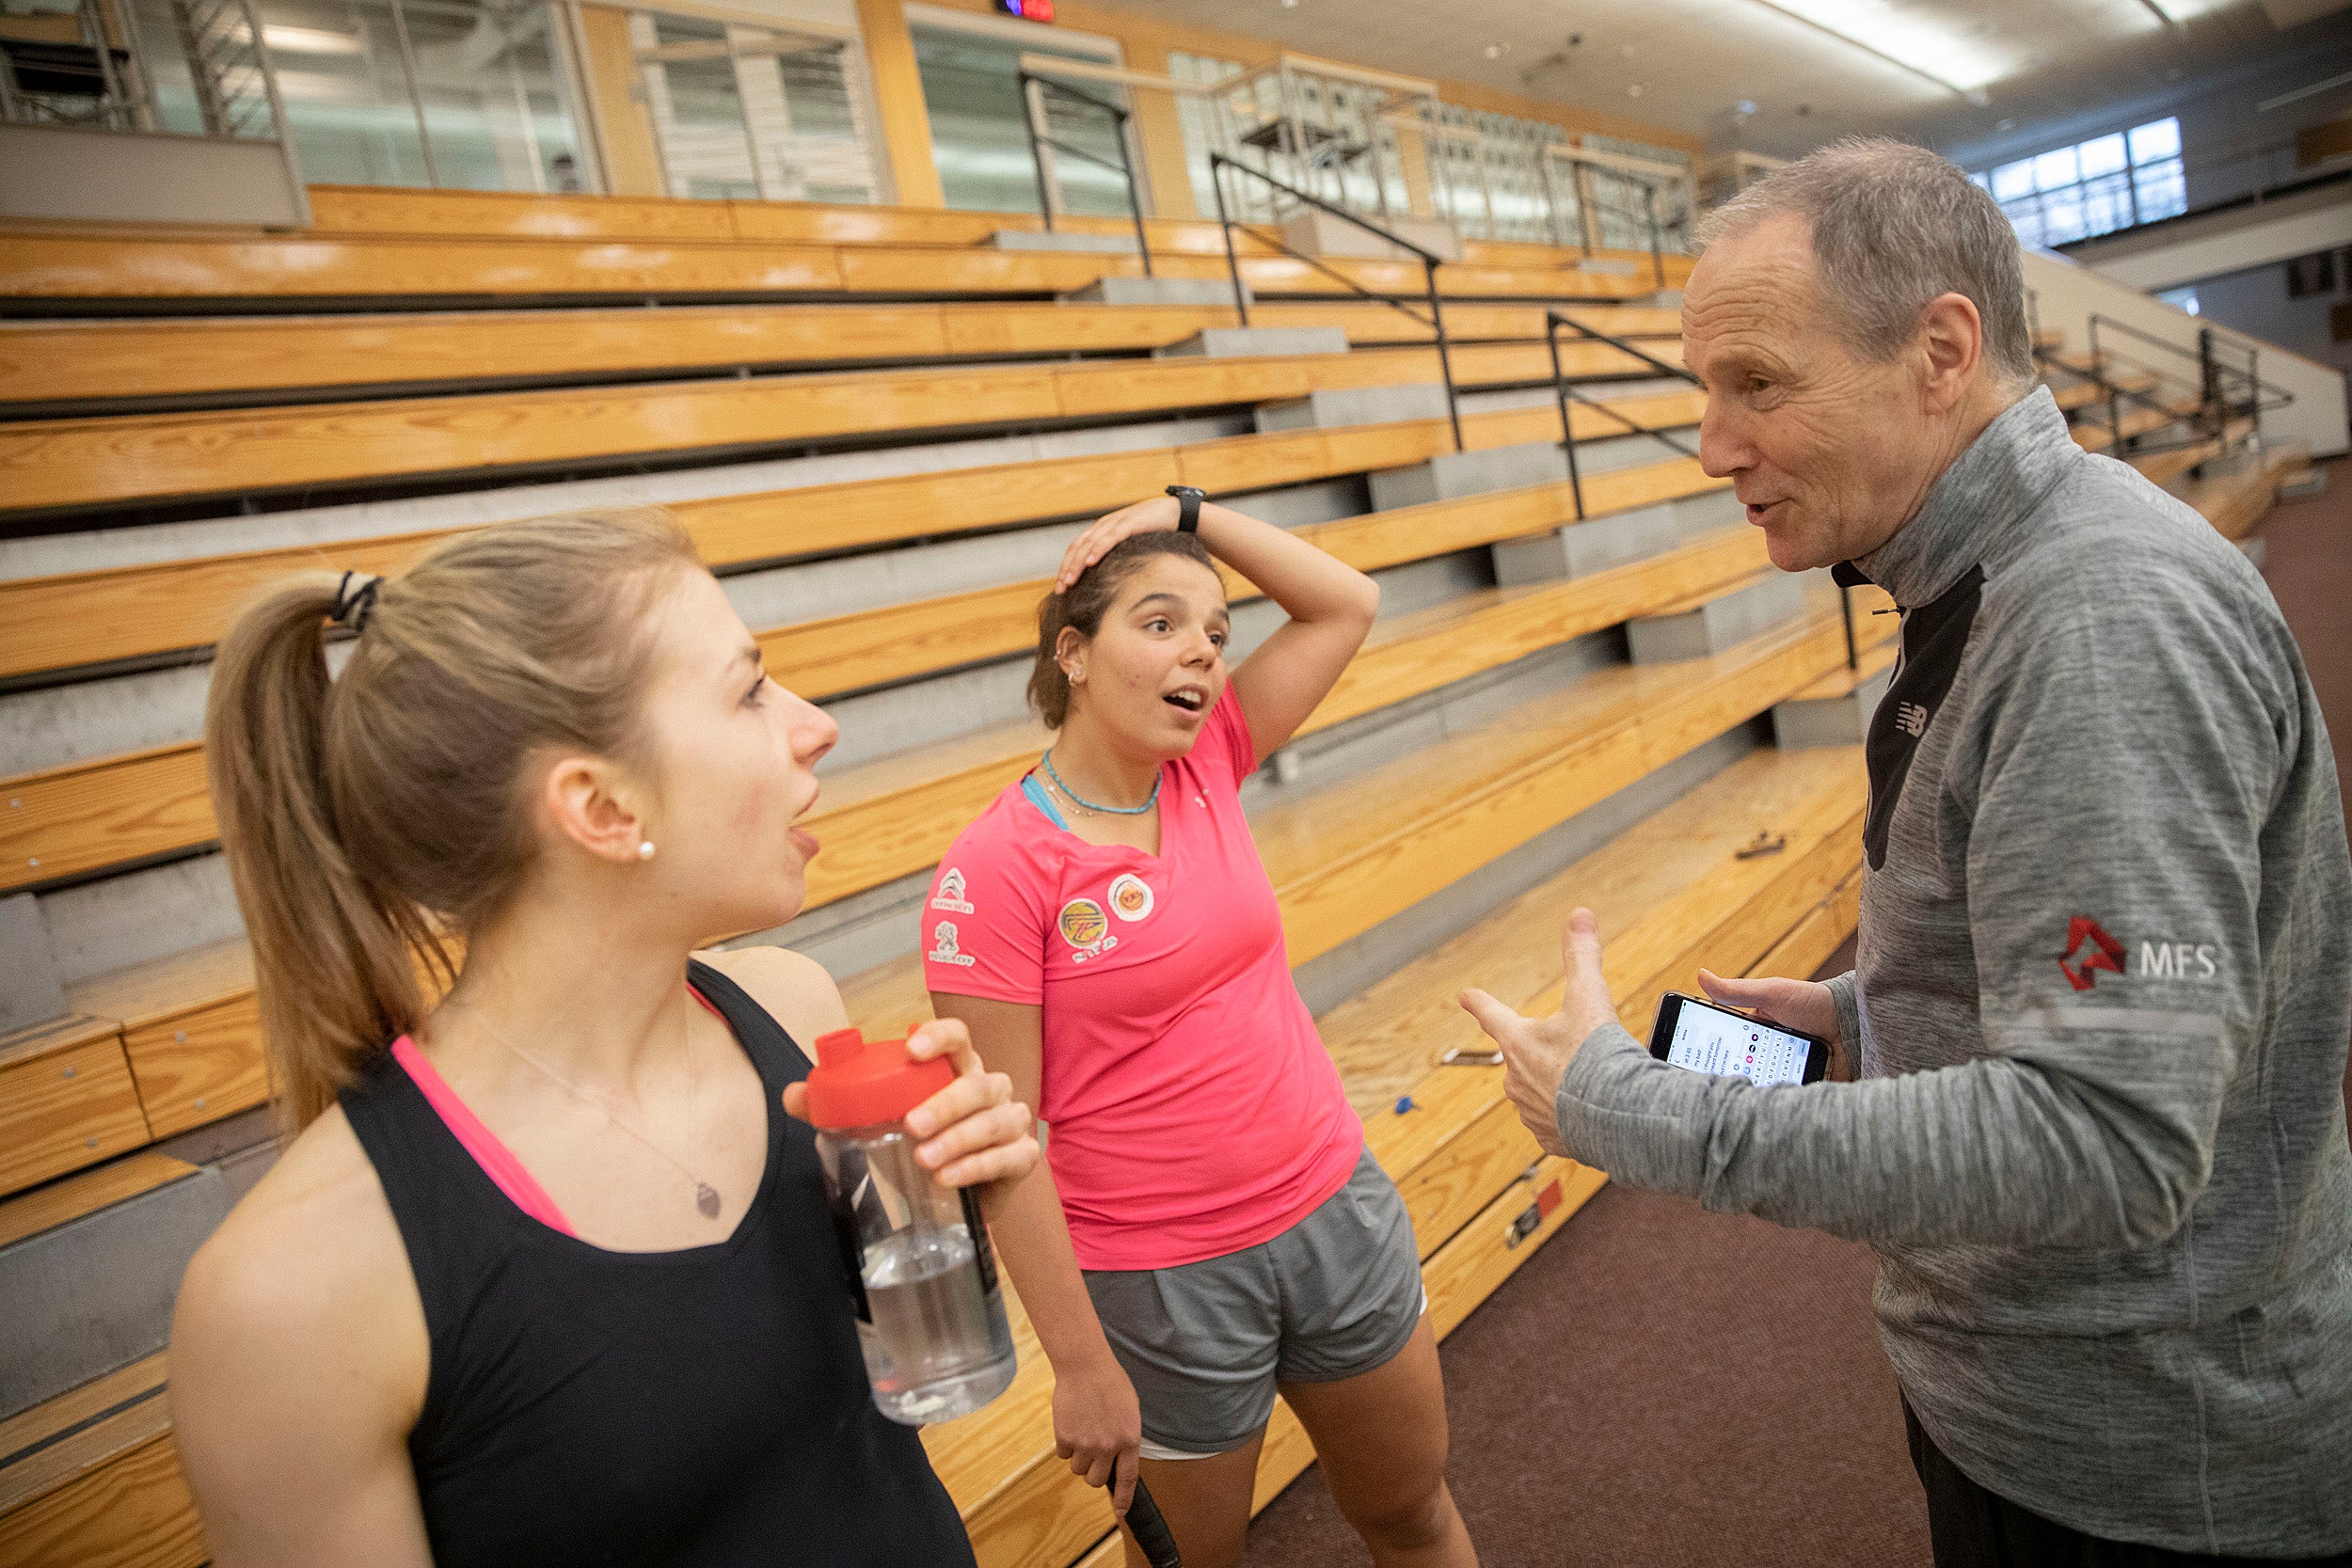 Amelia Henley and Amina Yousrytalk to coach Mike Way at the Murr Center.